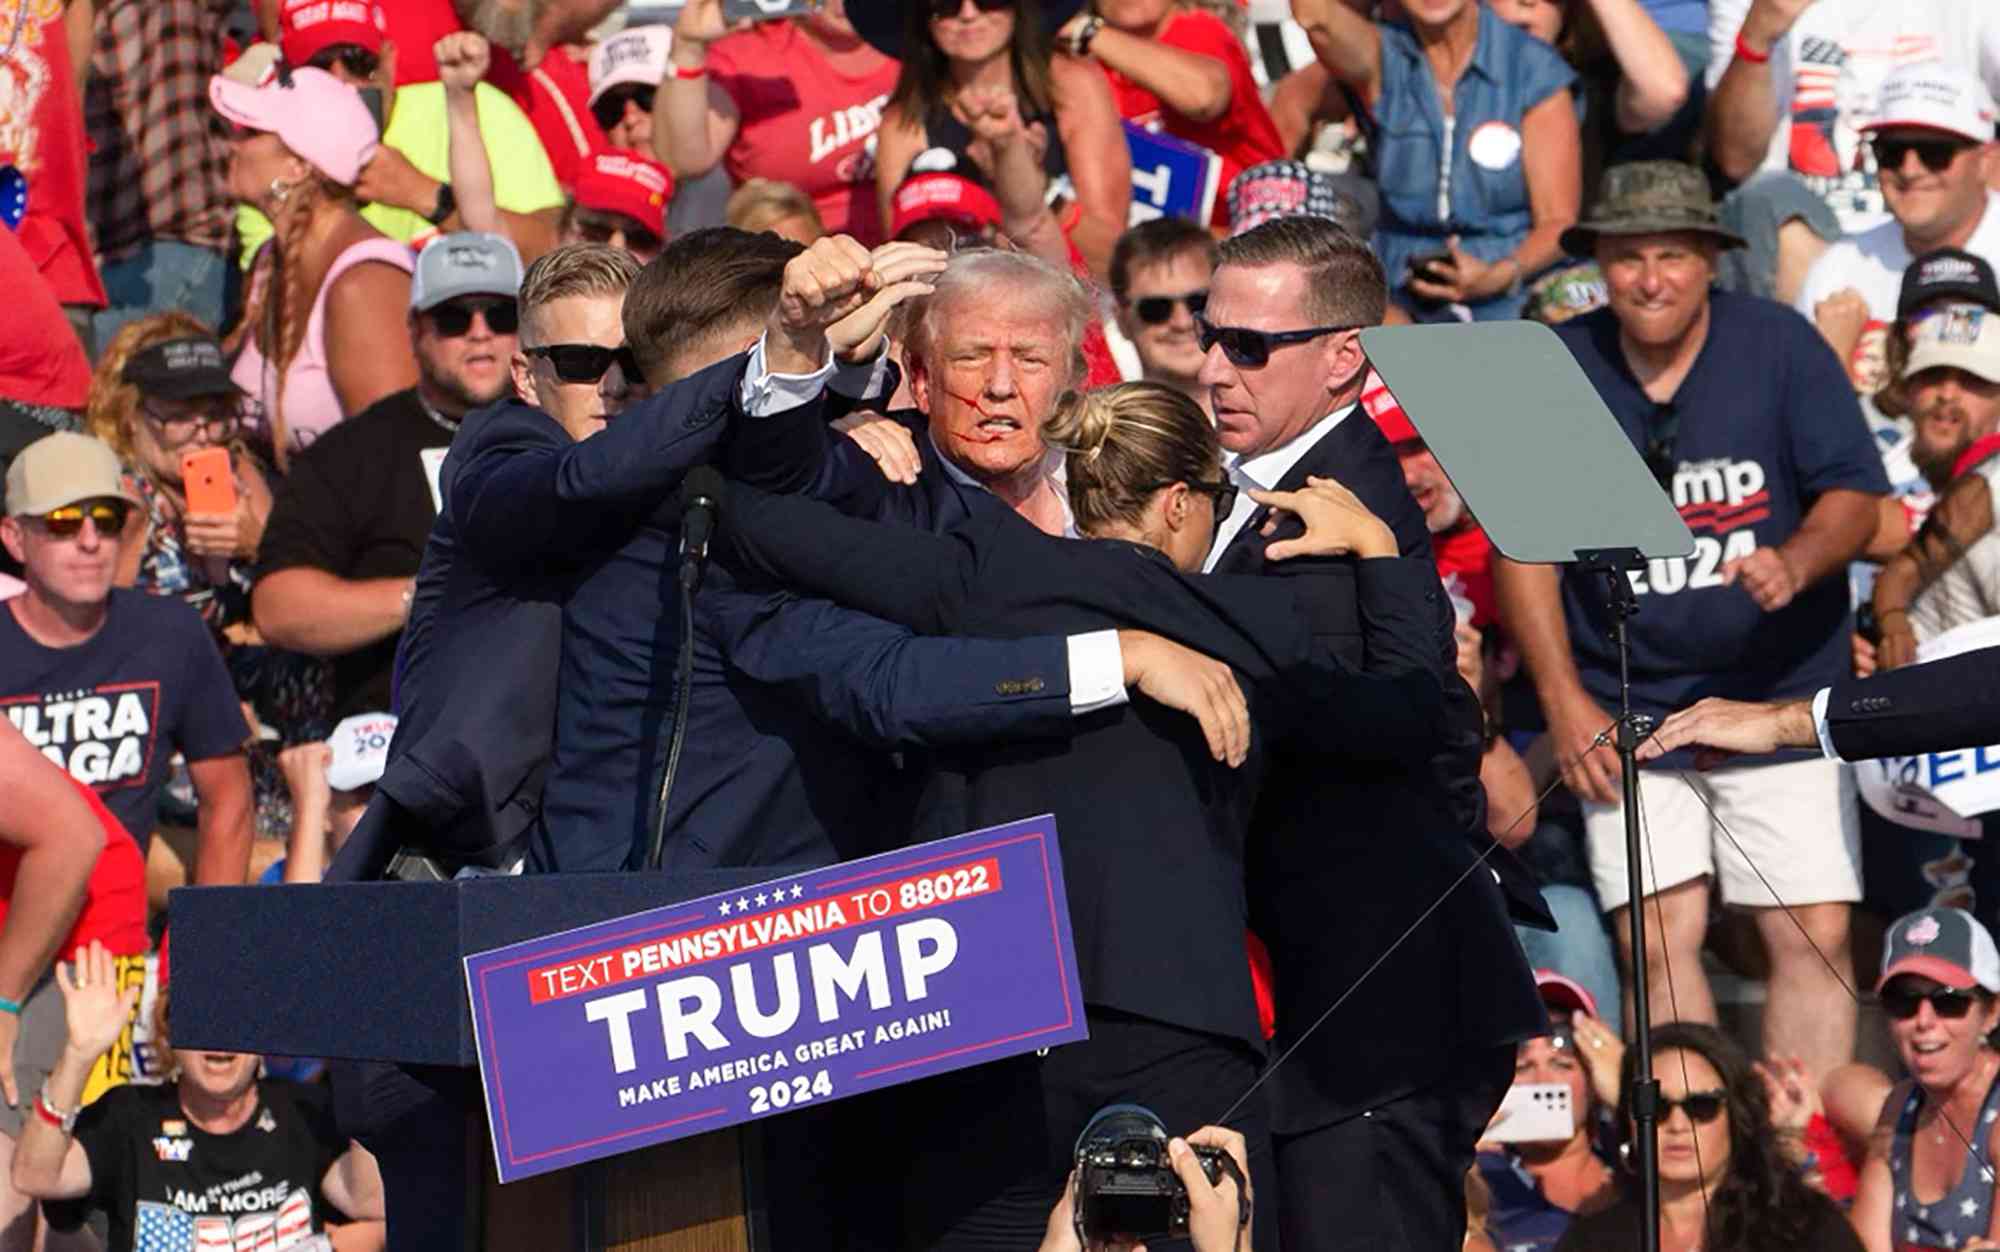 Donald Trump Campaign Rally Shooting: All the Historic Photos